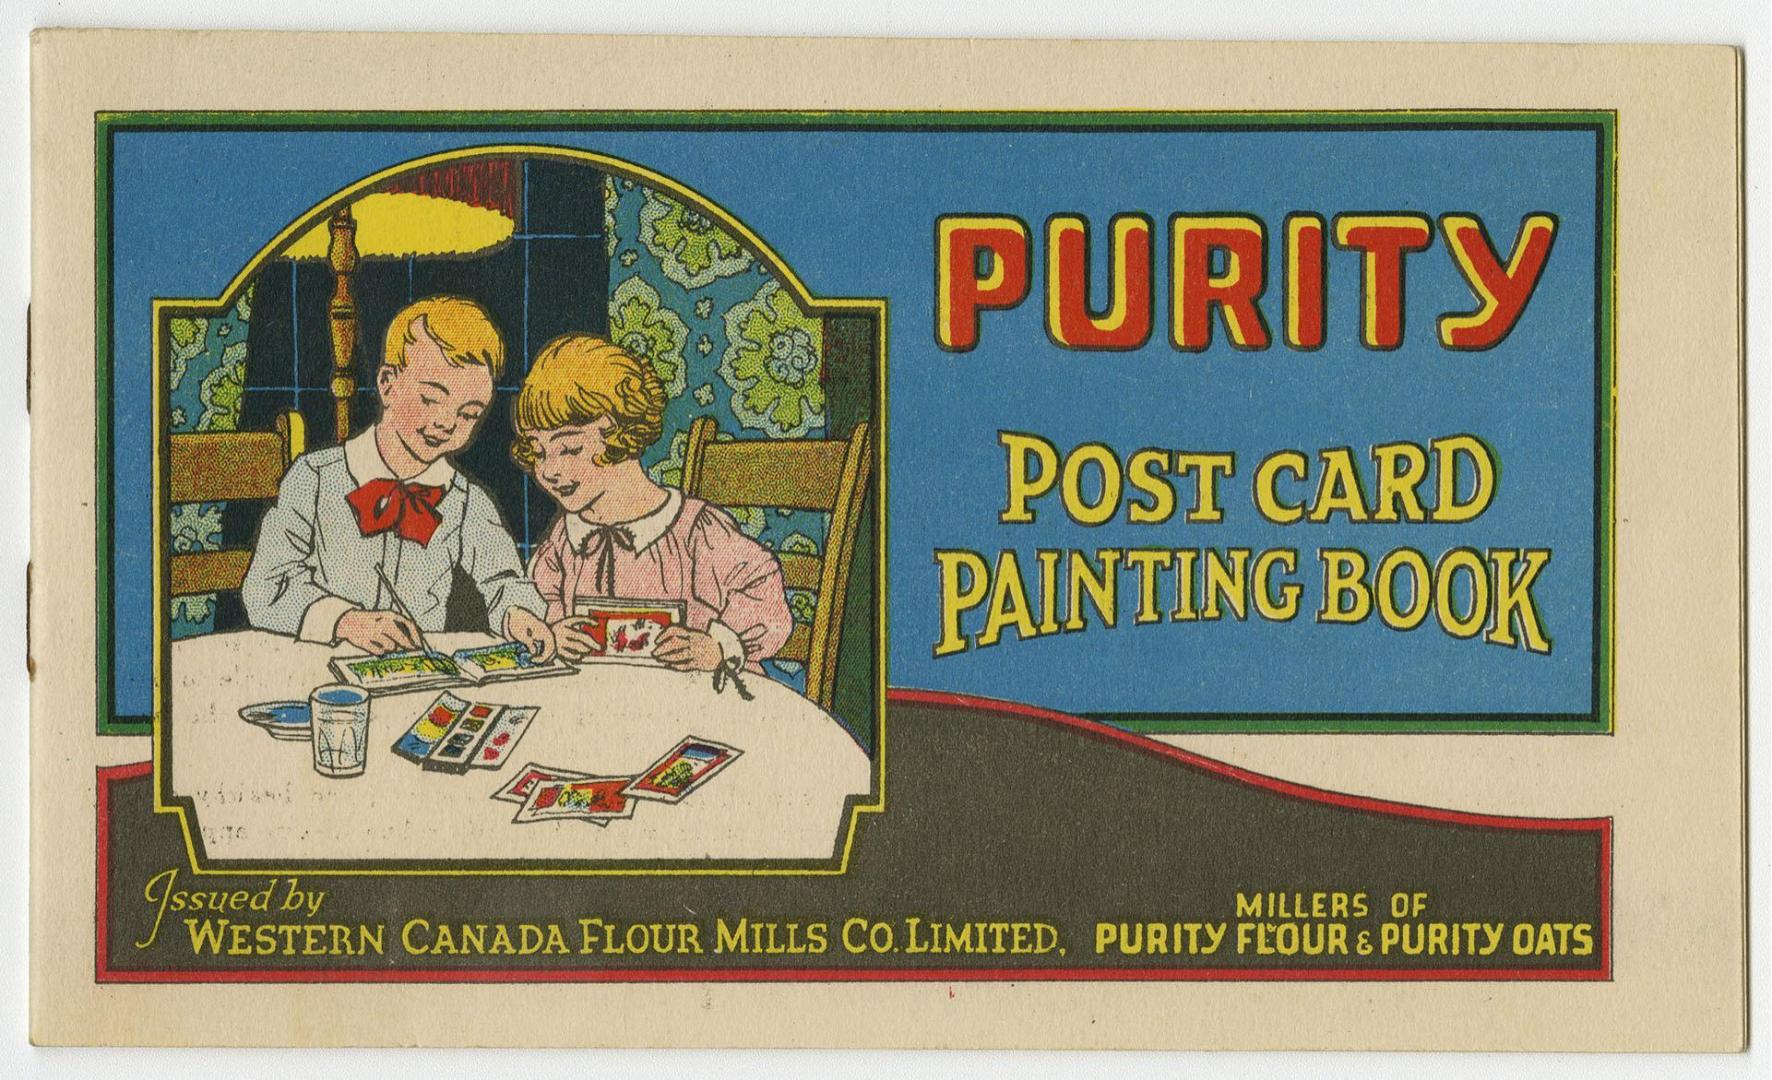 Purity post card painting book